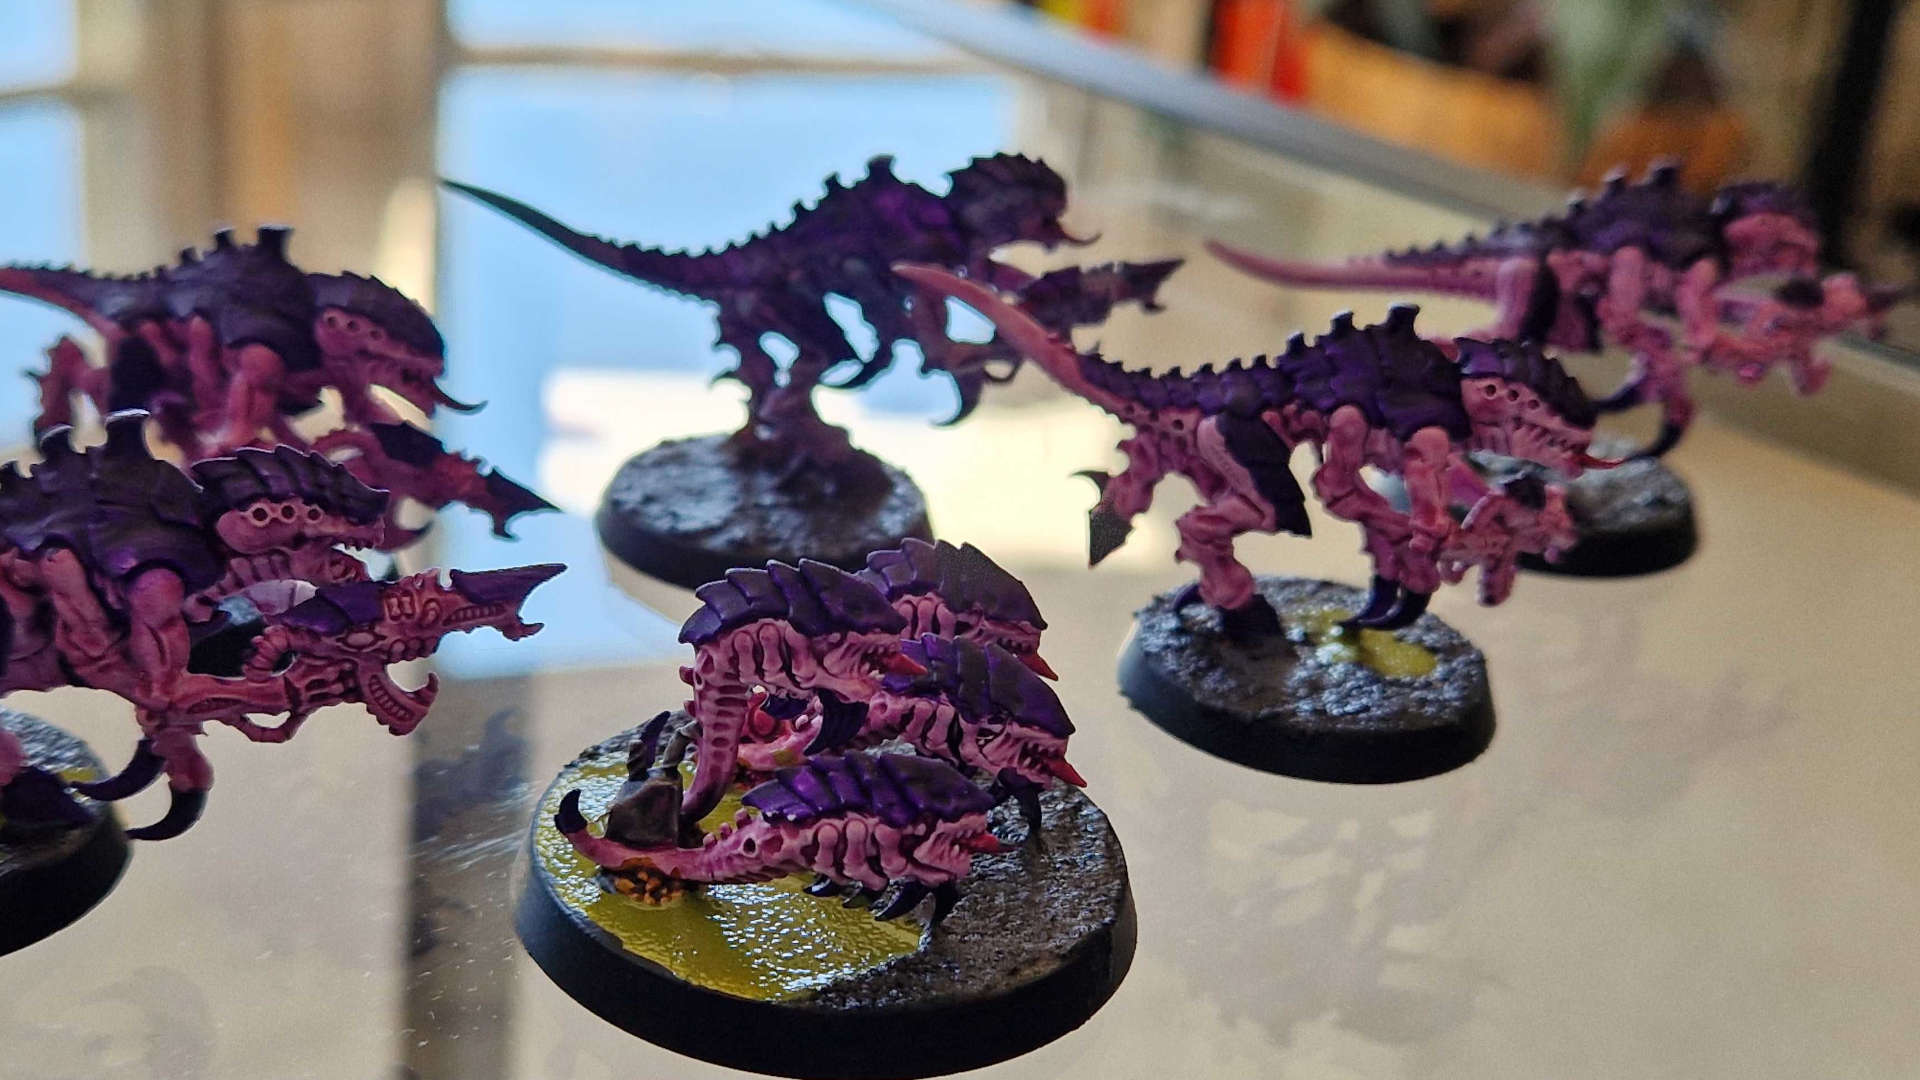 Warhammer 40k Tyranid Termagants and Ripper Swarm and Paint Set